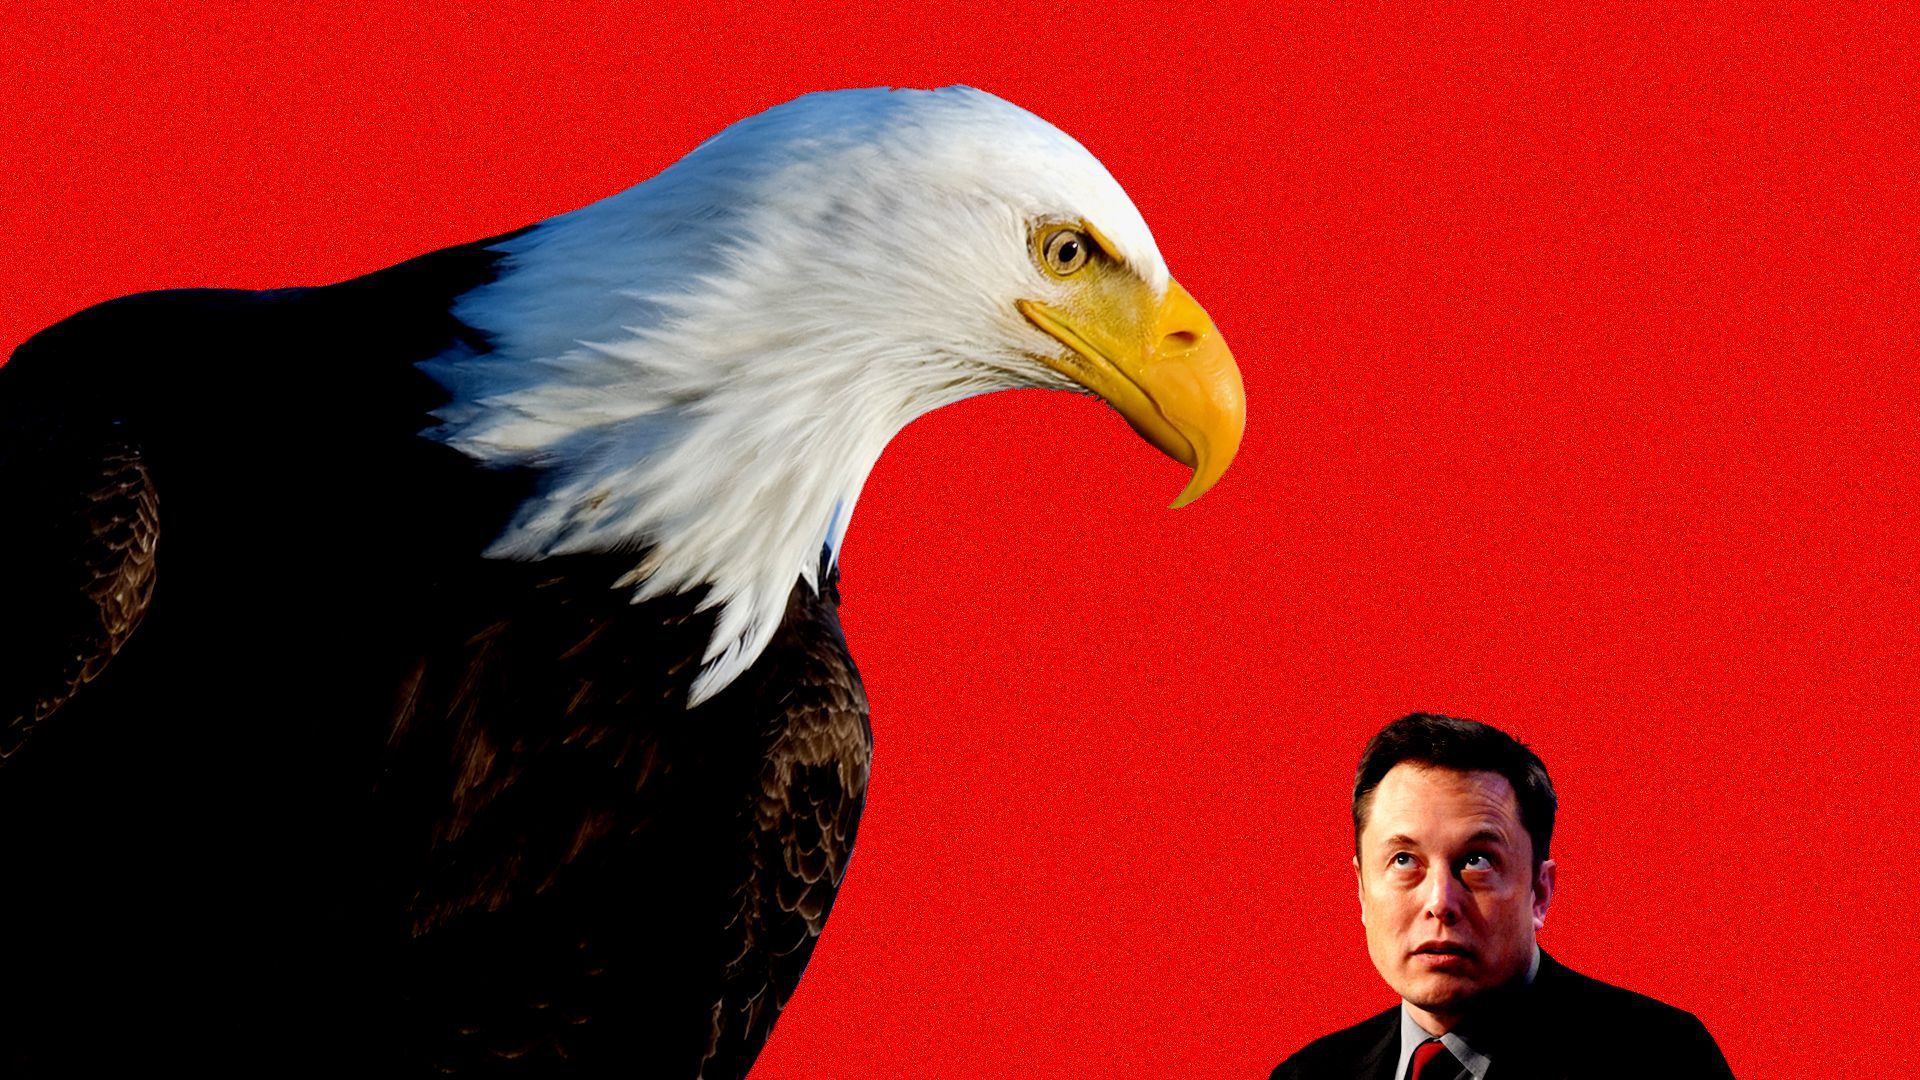 An illustration of a giant eagle hovering over Elon Musk